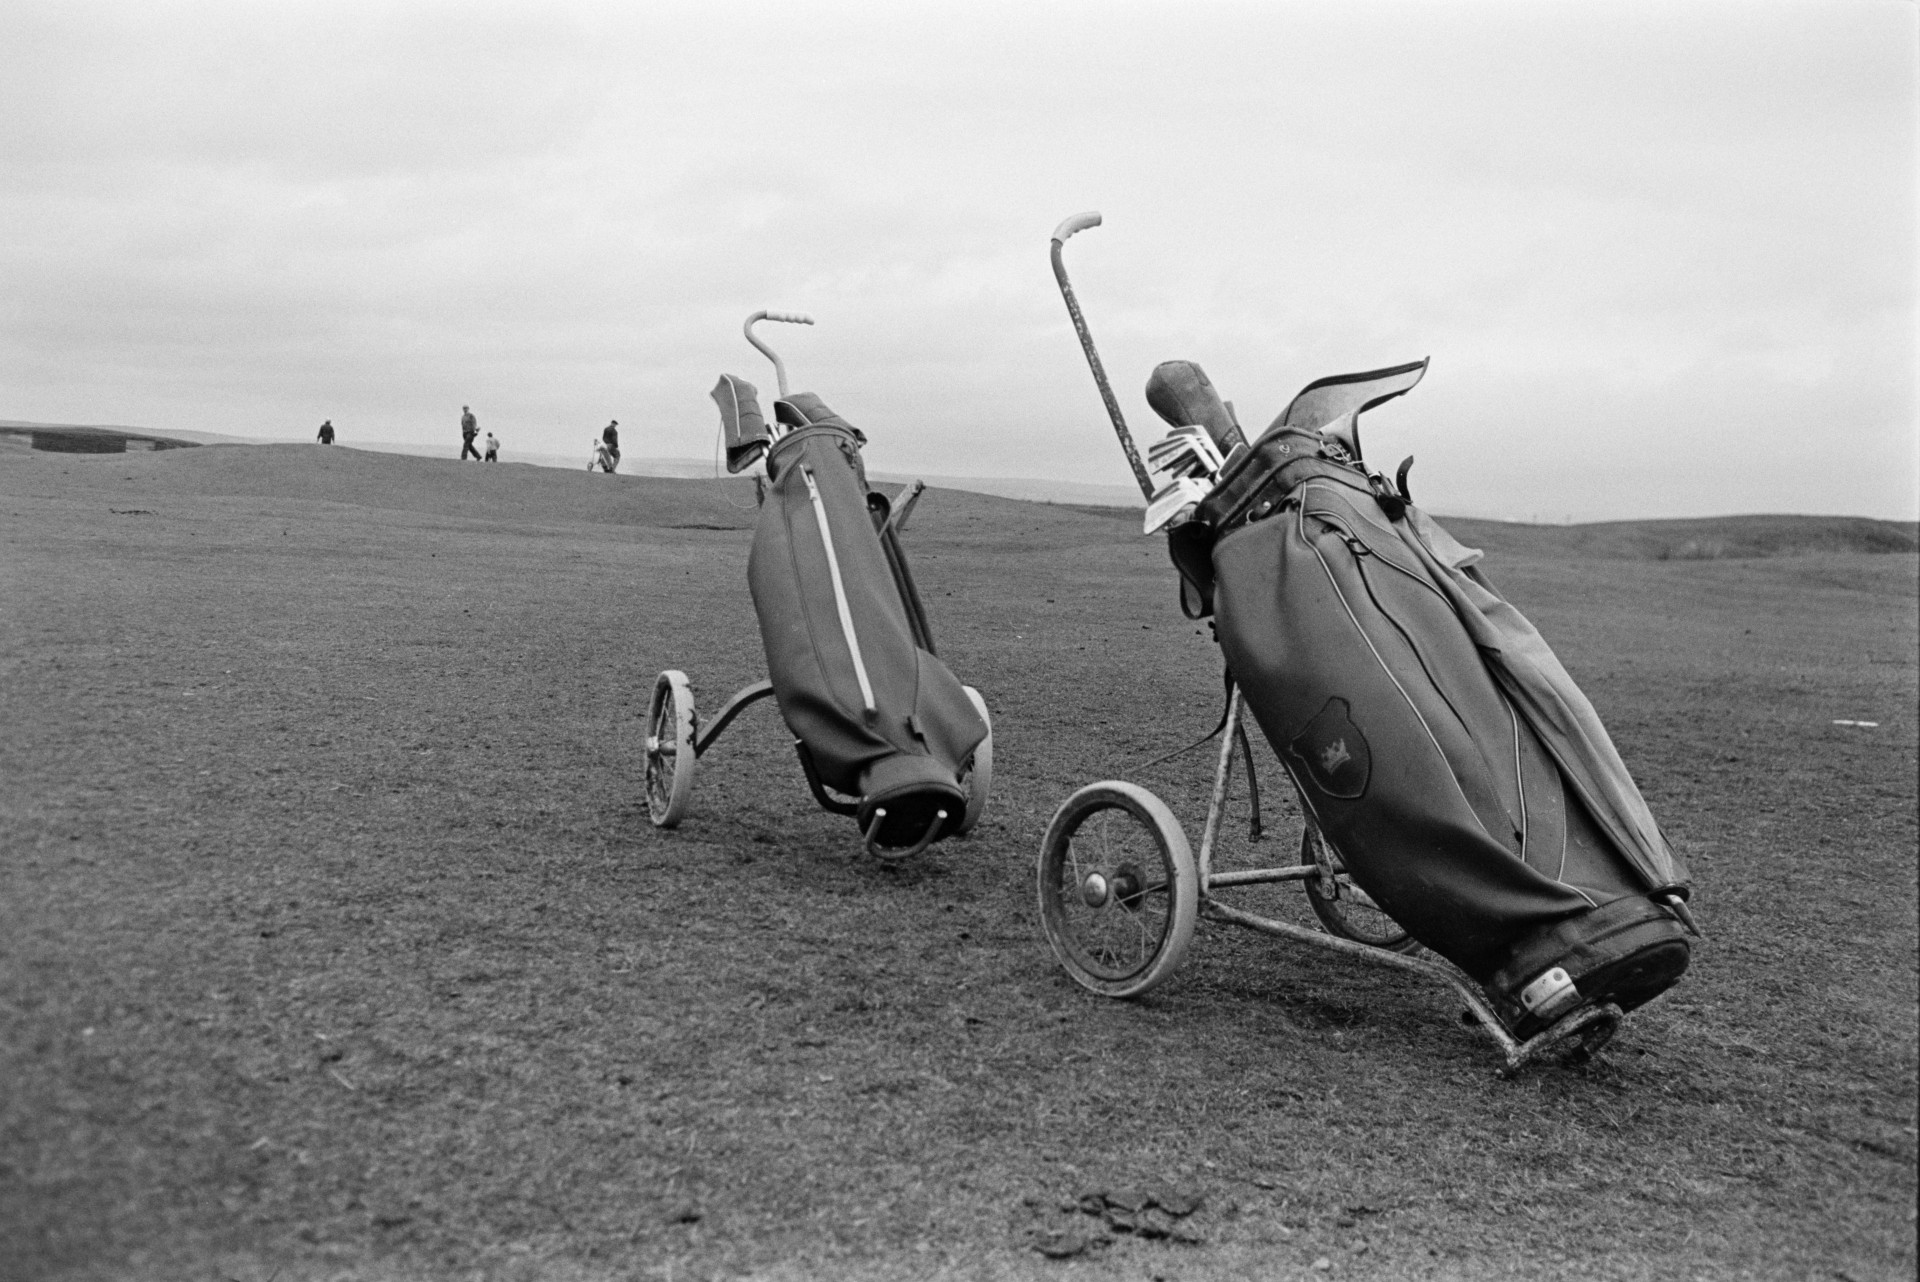 Golf bags and clubs on a golf course at Westward Ho! People can be seen playing golf in the distance.